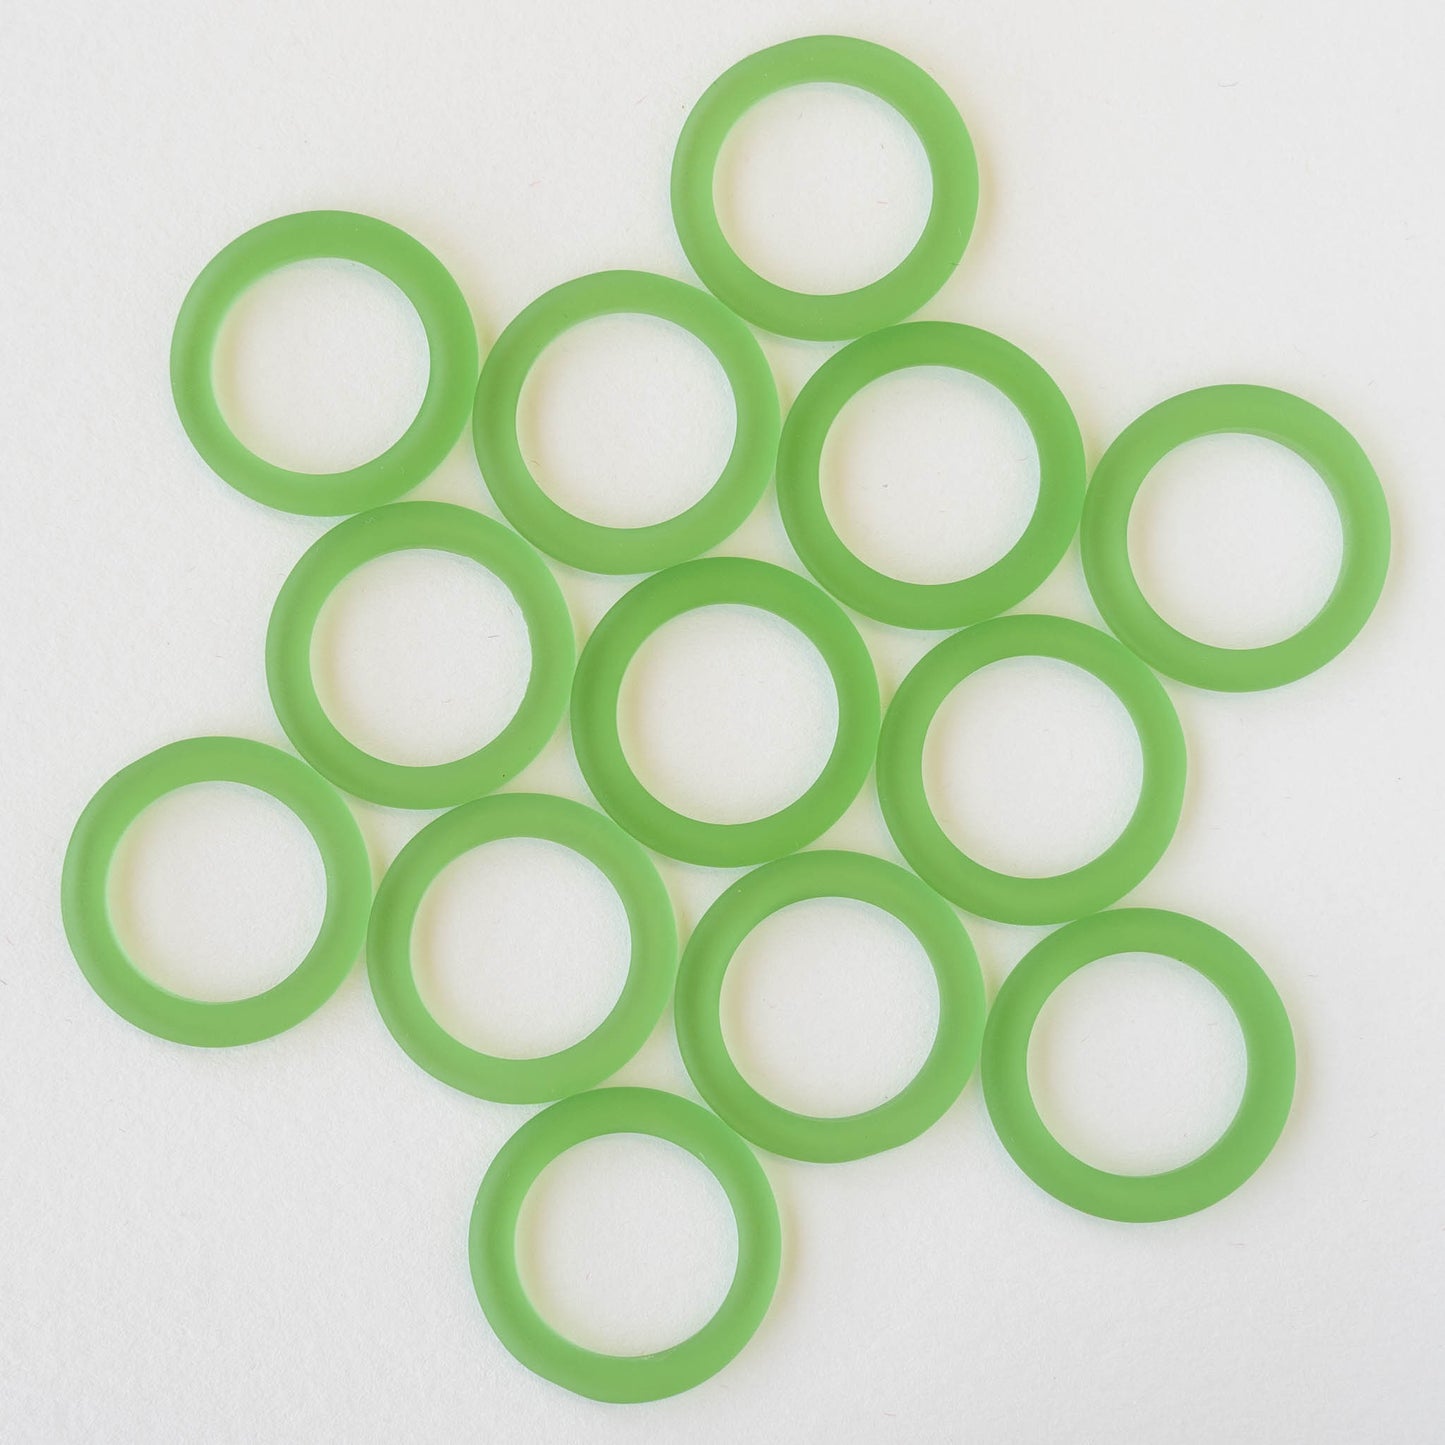 27mm Frosted Glass Rings - Green - 2 Rings